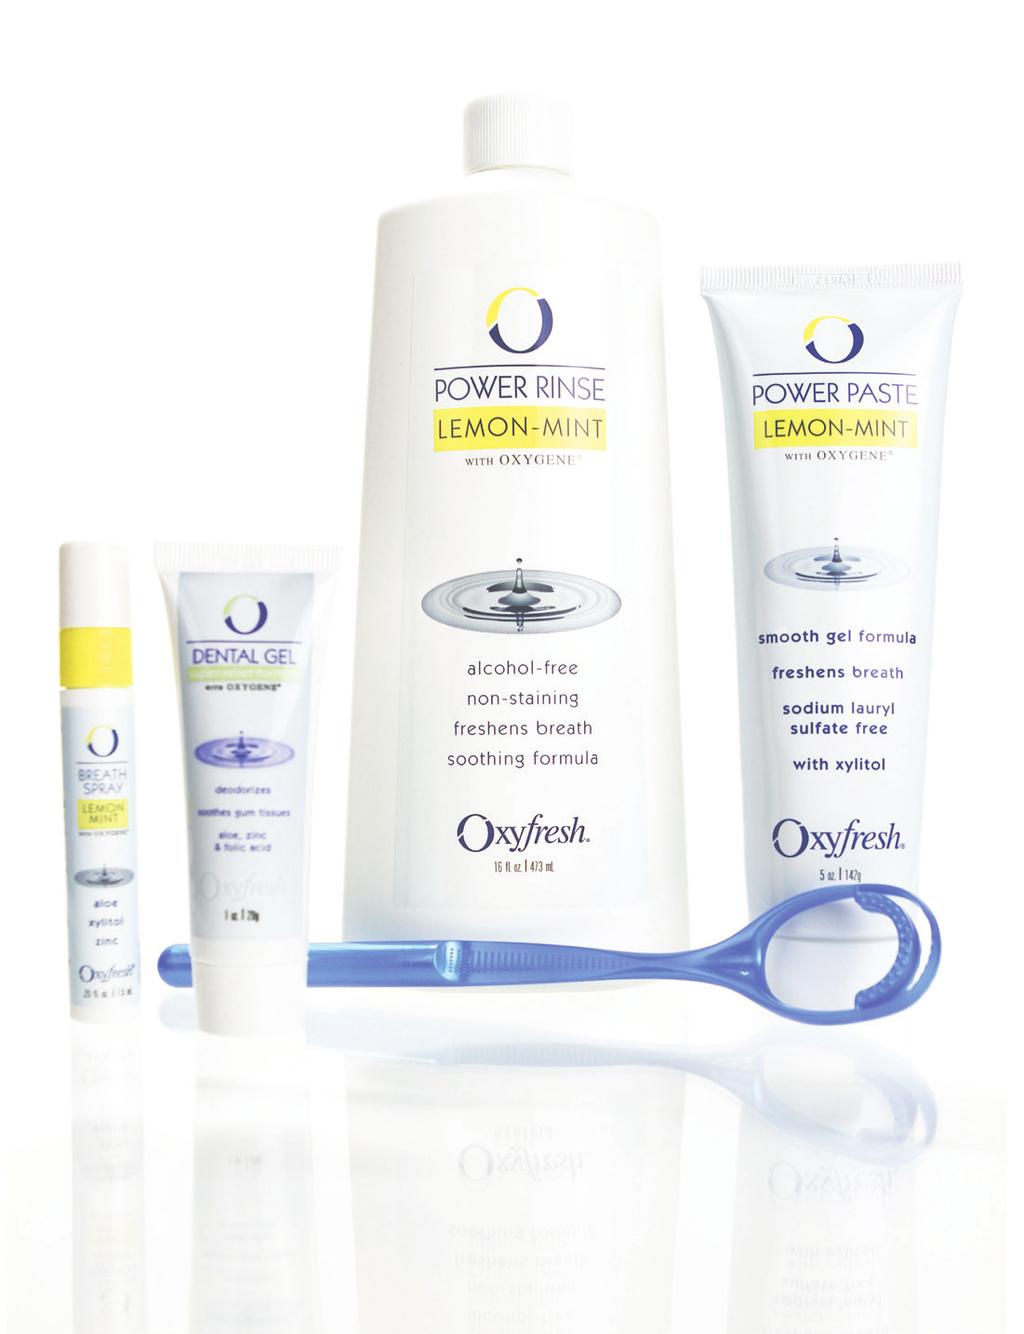 Ultimate Hygiene Kit This kit is recommended for those who enjoy the fresh lemon-mint flavor and prefer a gel formula over a paste.